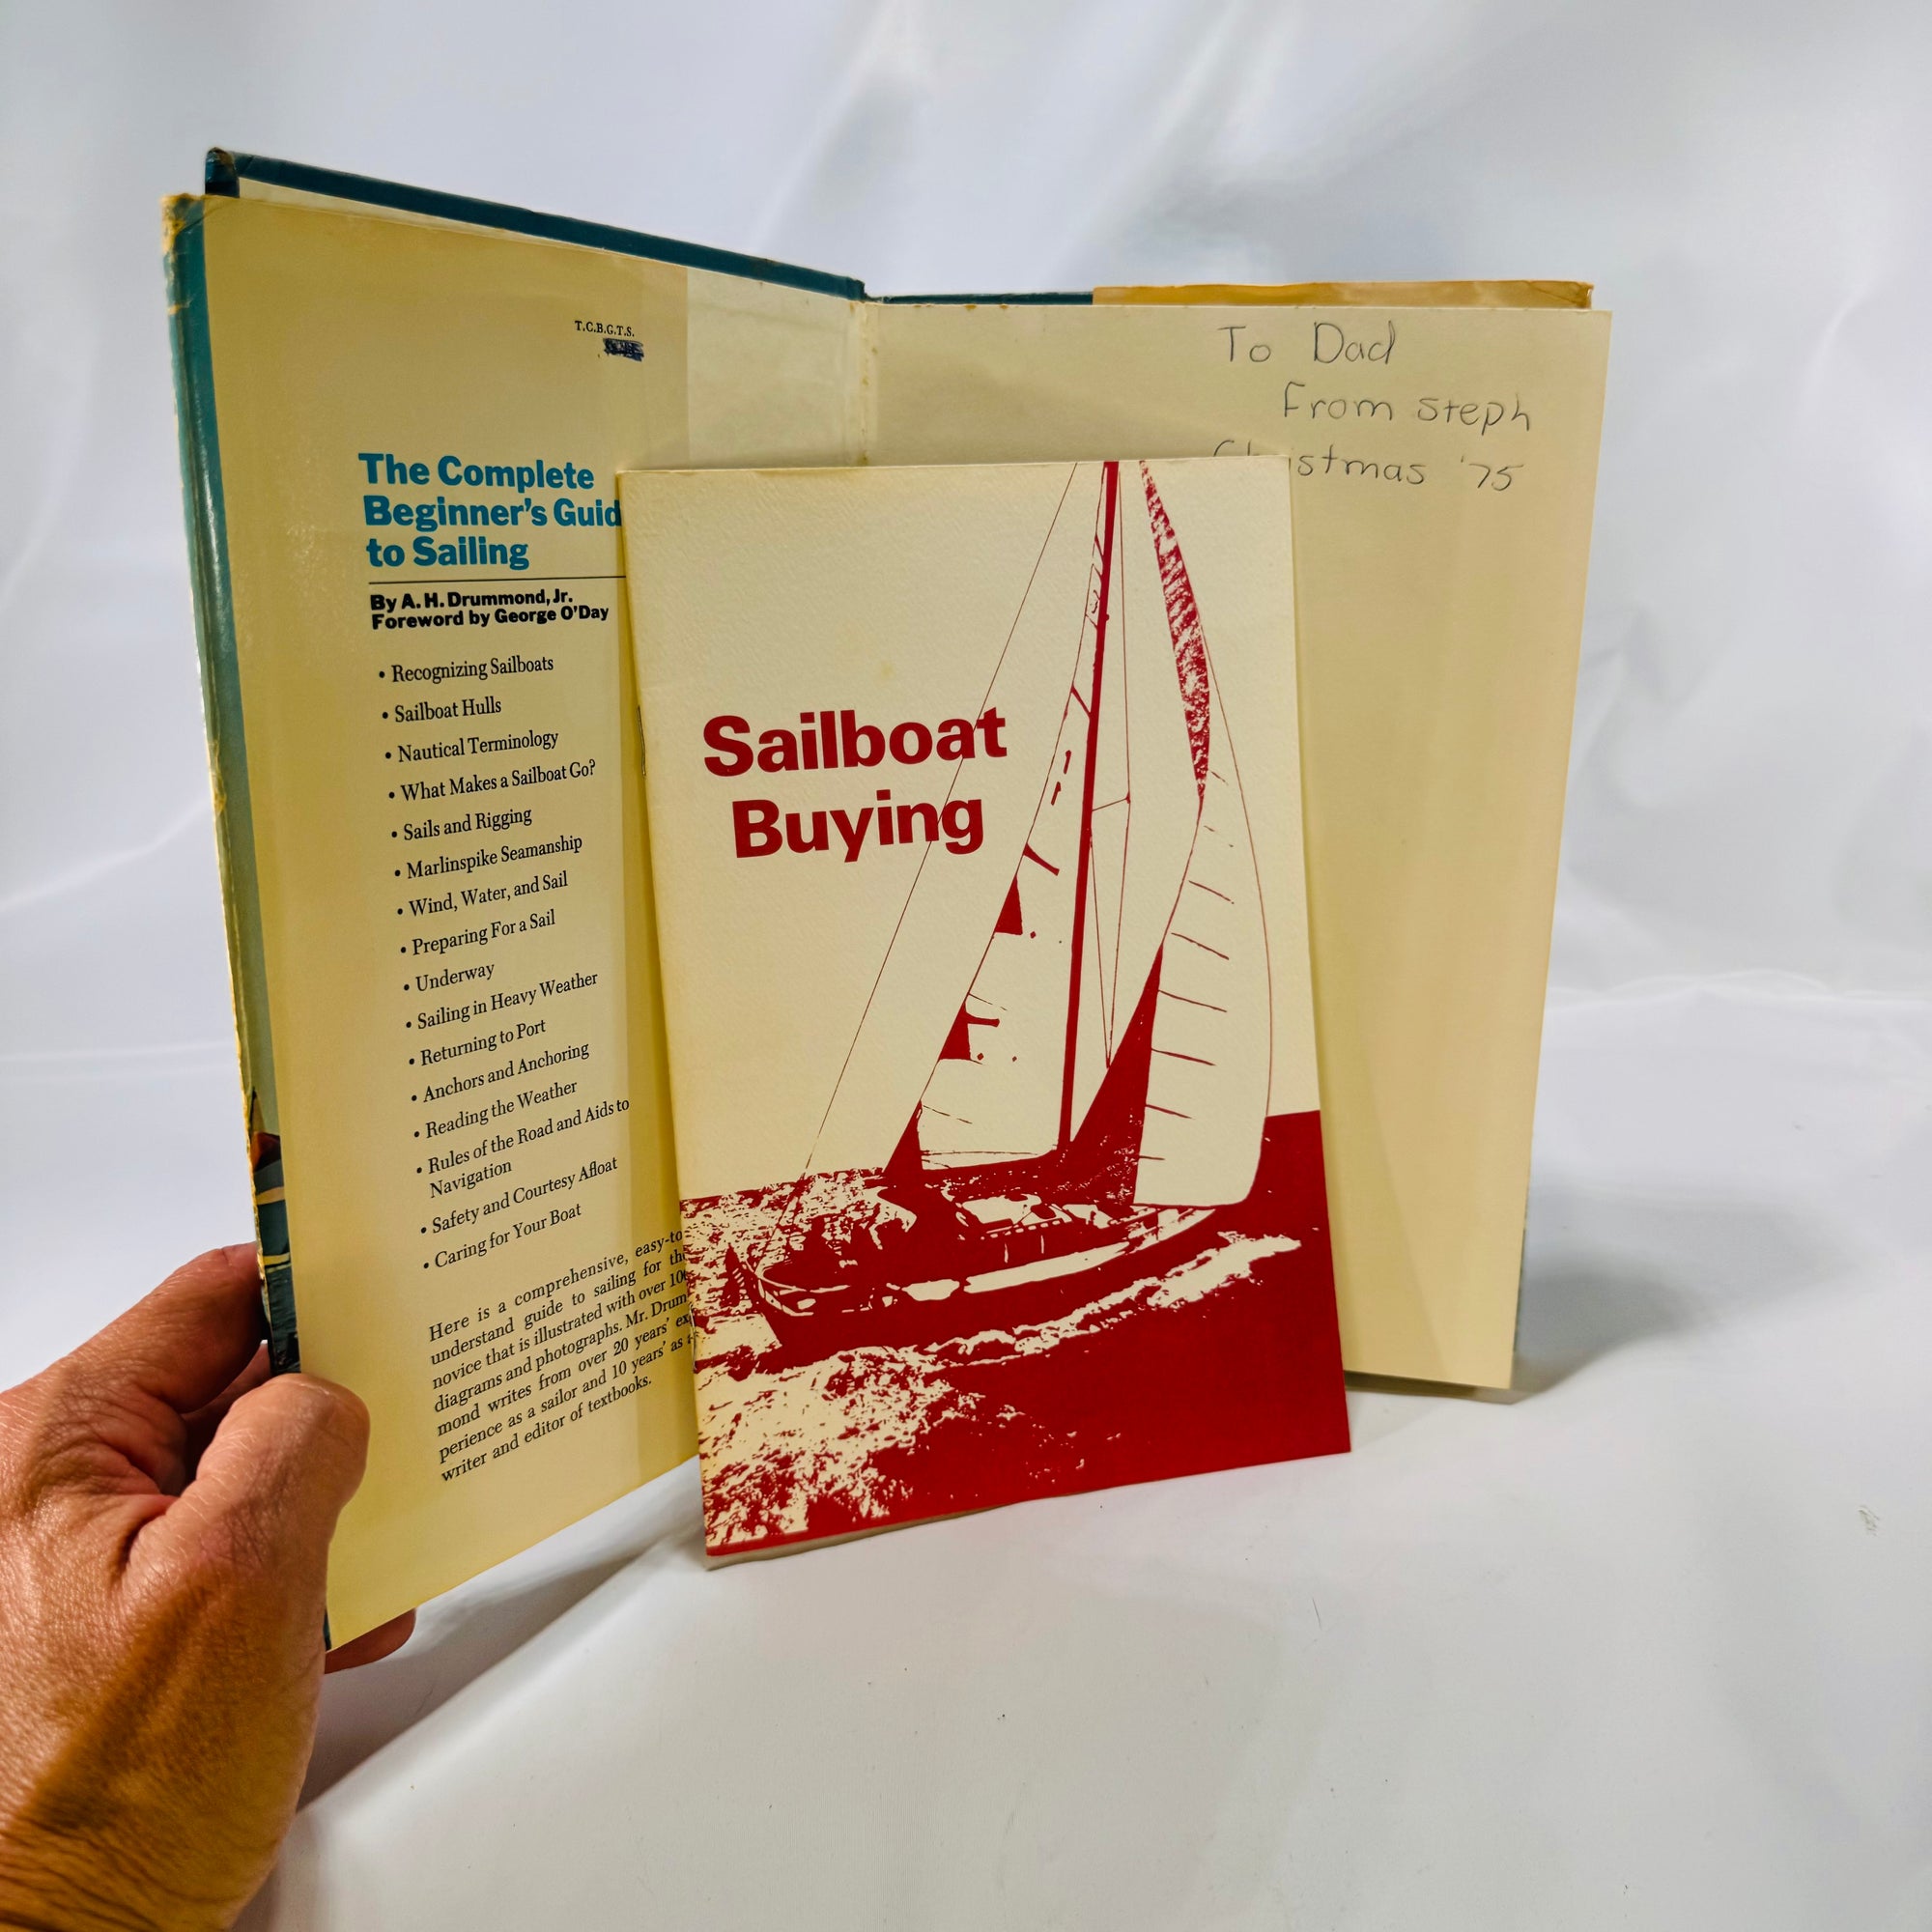 Beginner's Guide to Sailing A.H.Drummond, Jr 1971 Doubleday & Company